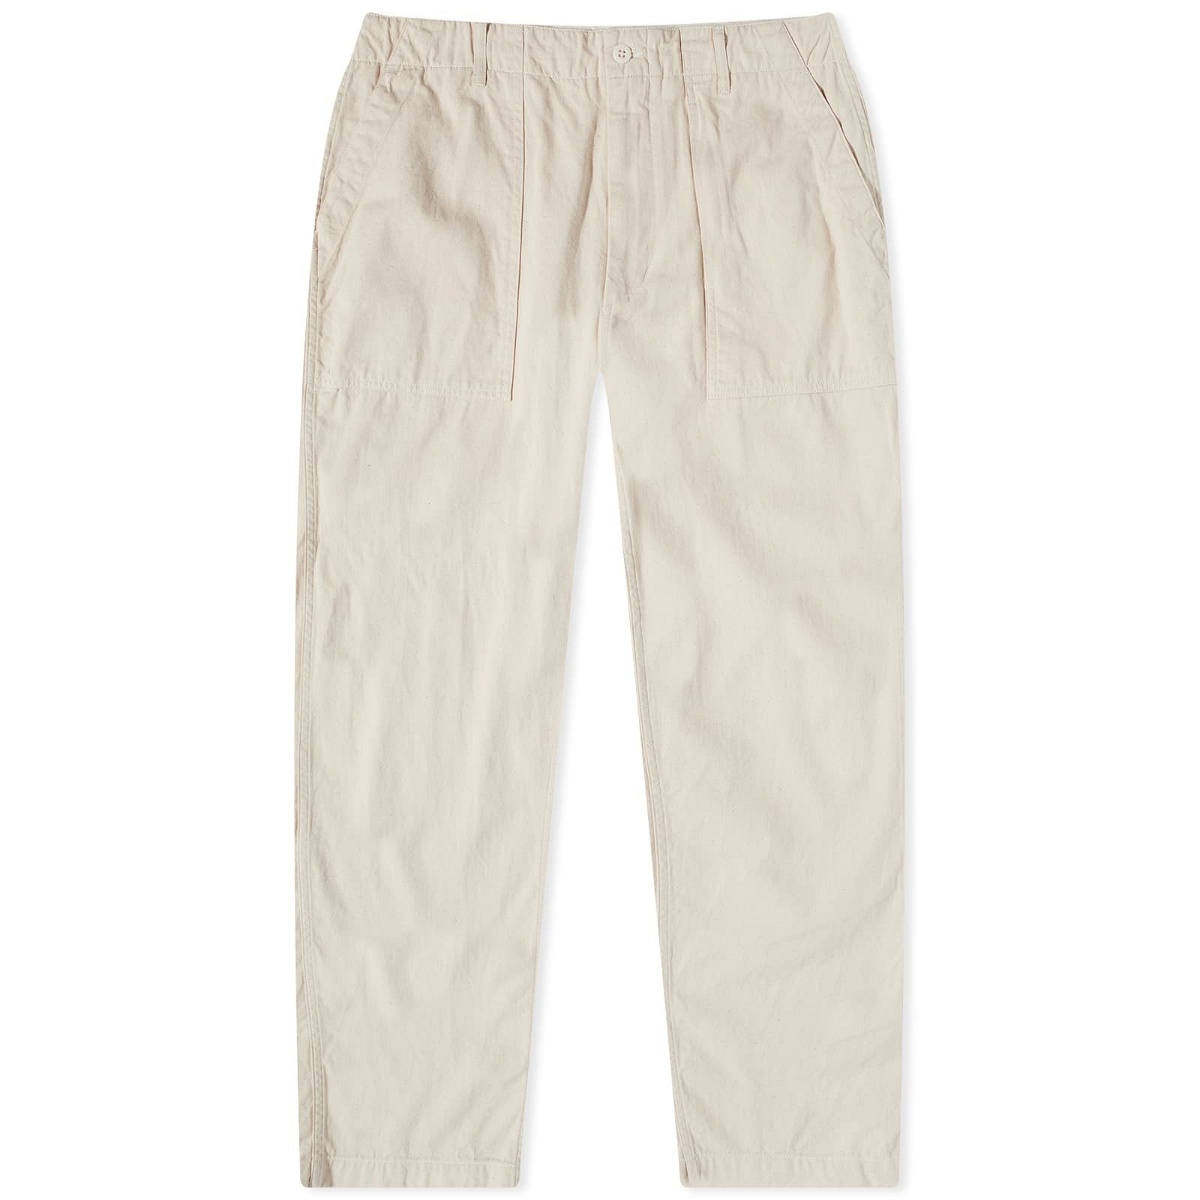 Engineered Garments Men's Fatigue Pant in Natural Twill Engineered Garments